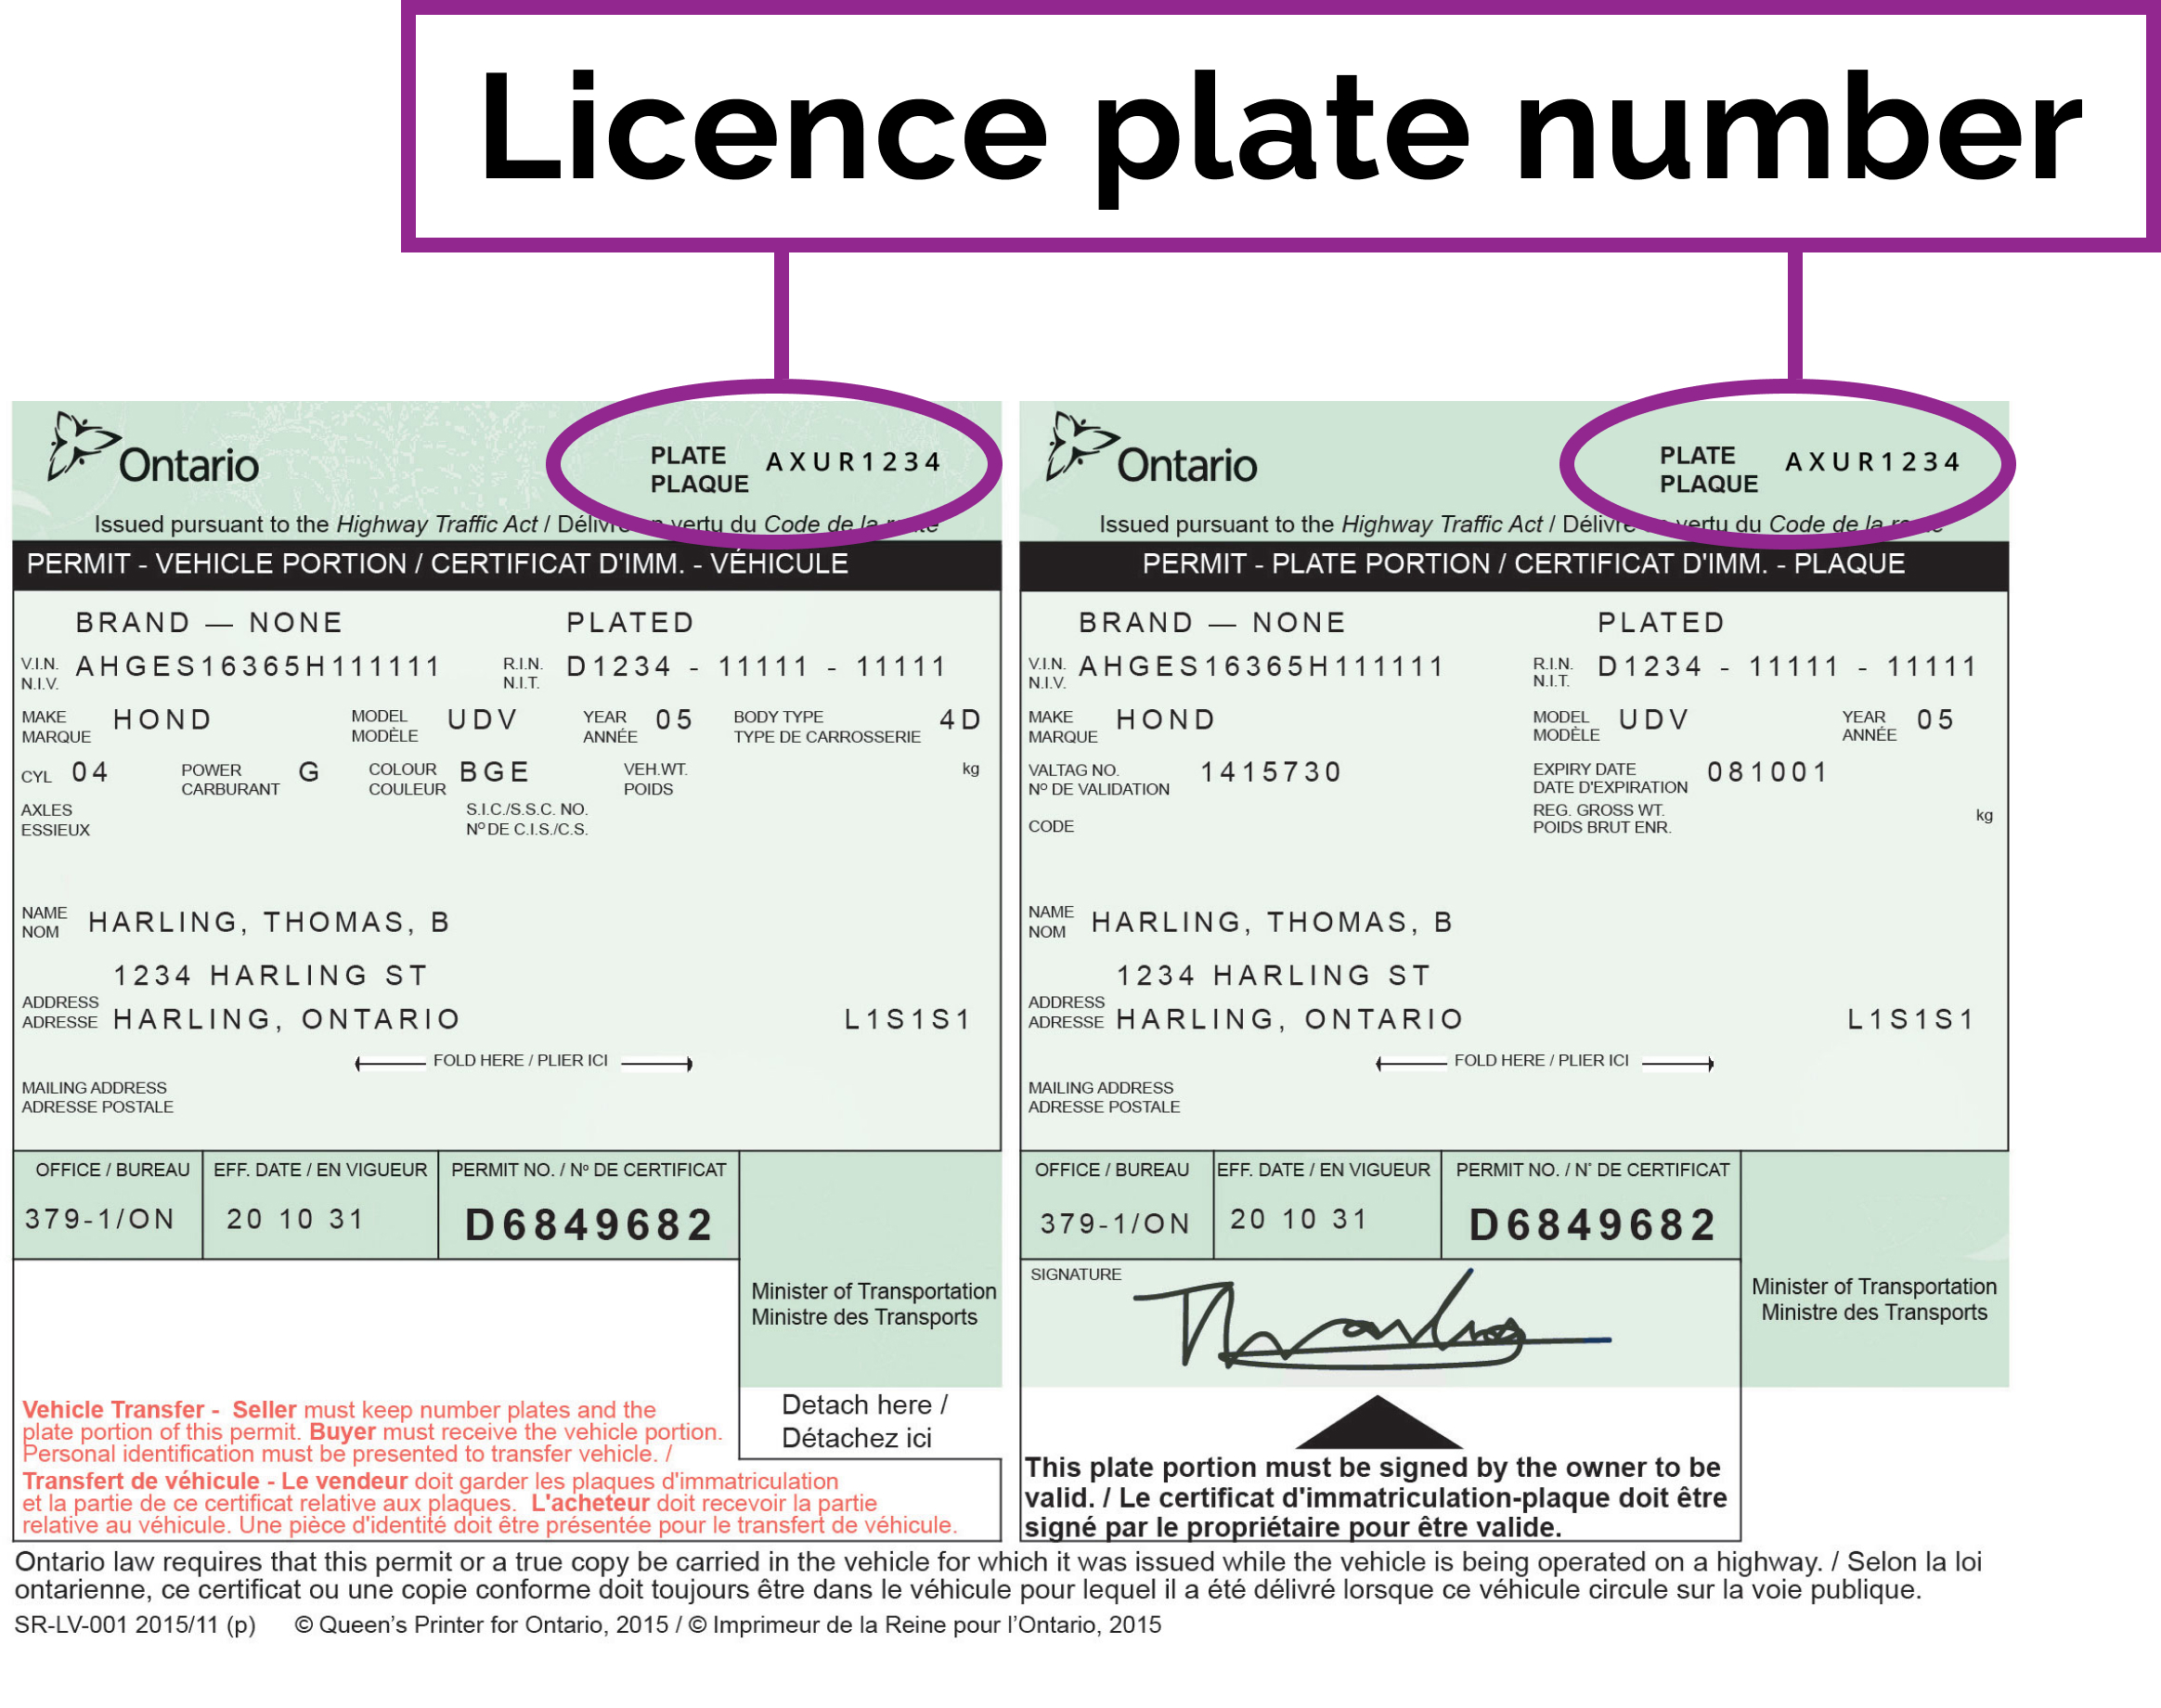 An image of the Ontario vehicle permit highlighting the licence plate number at the top.